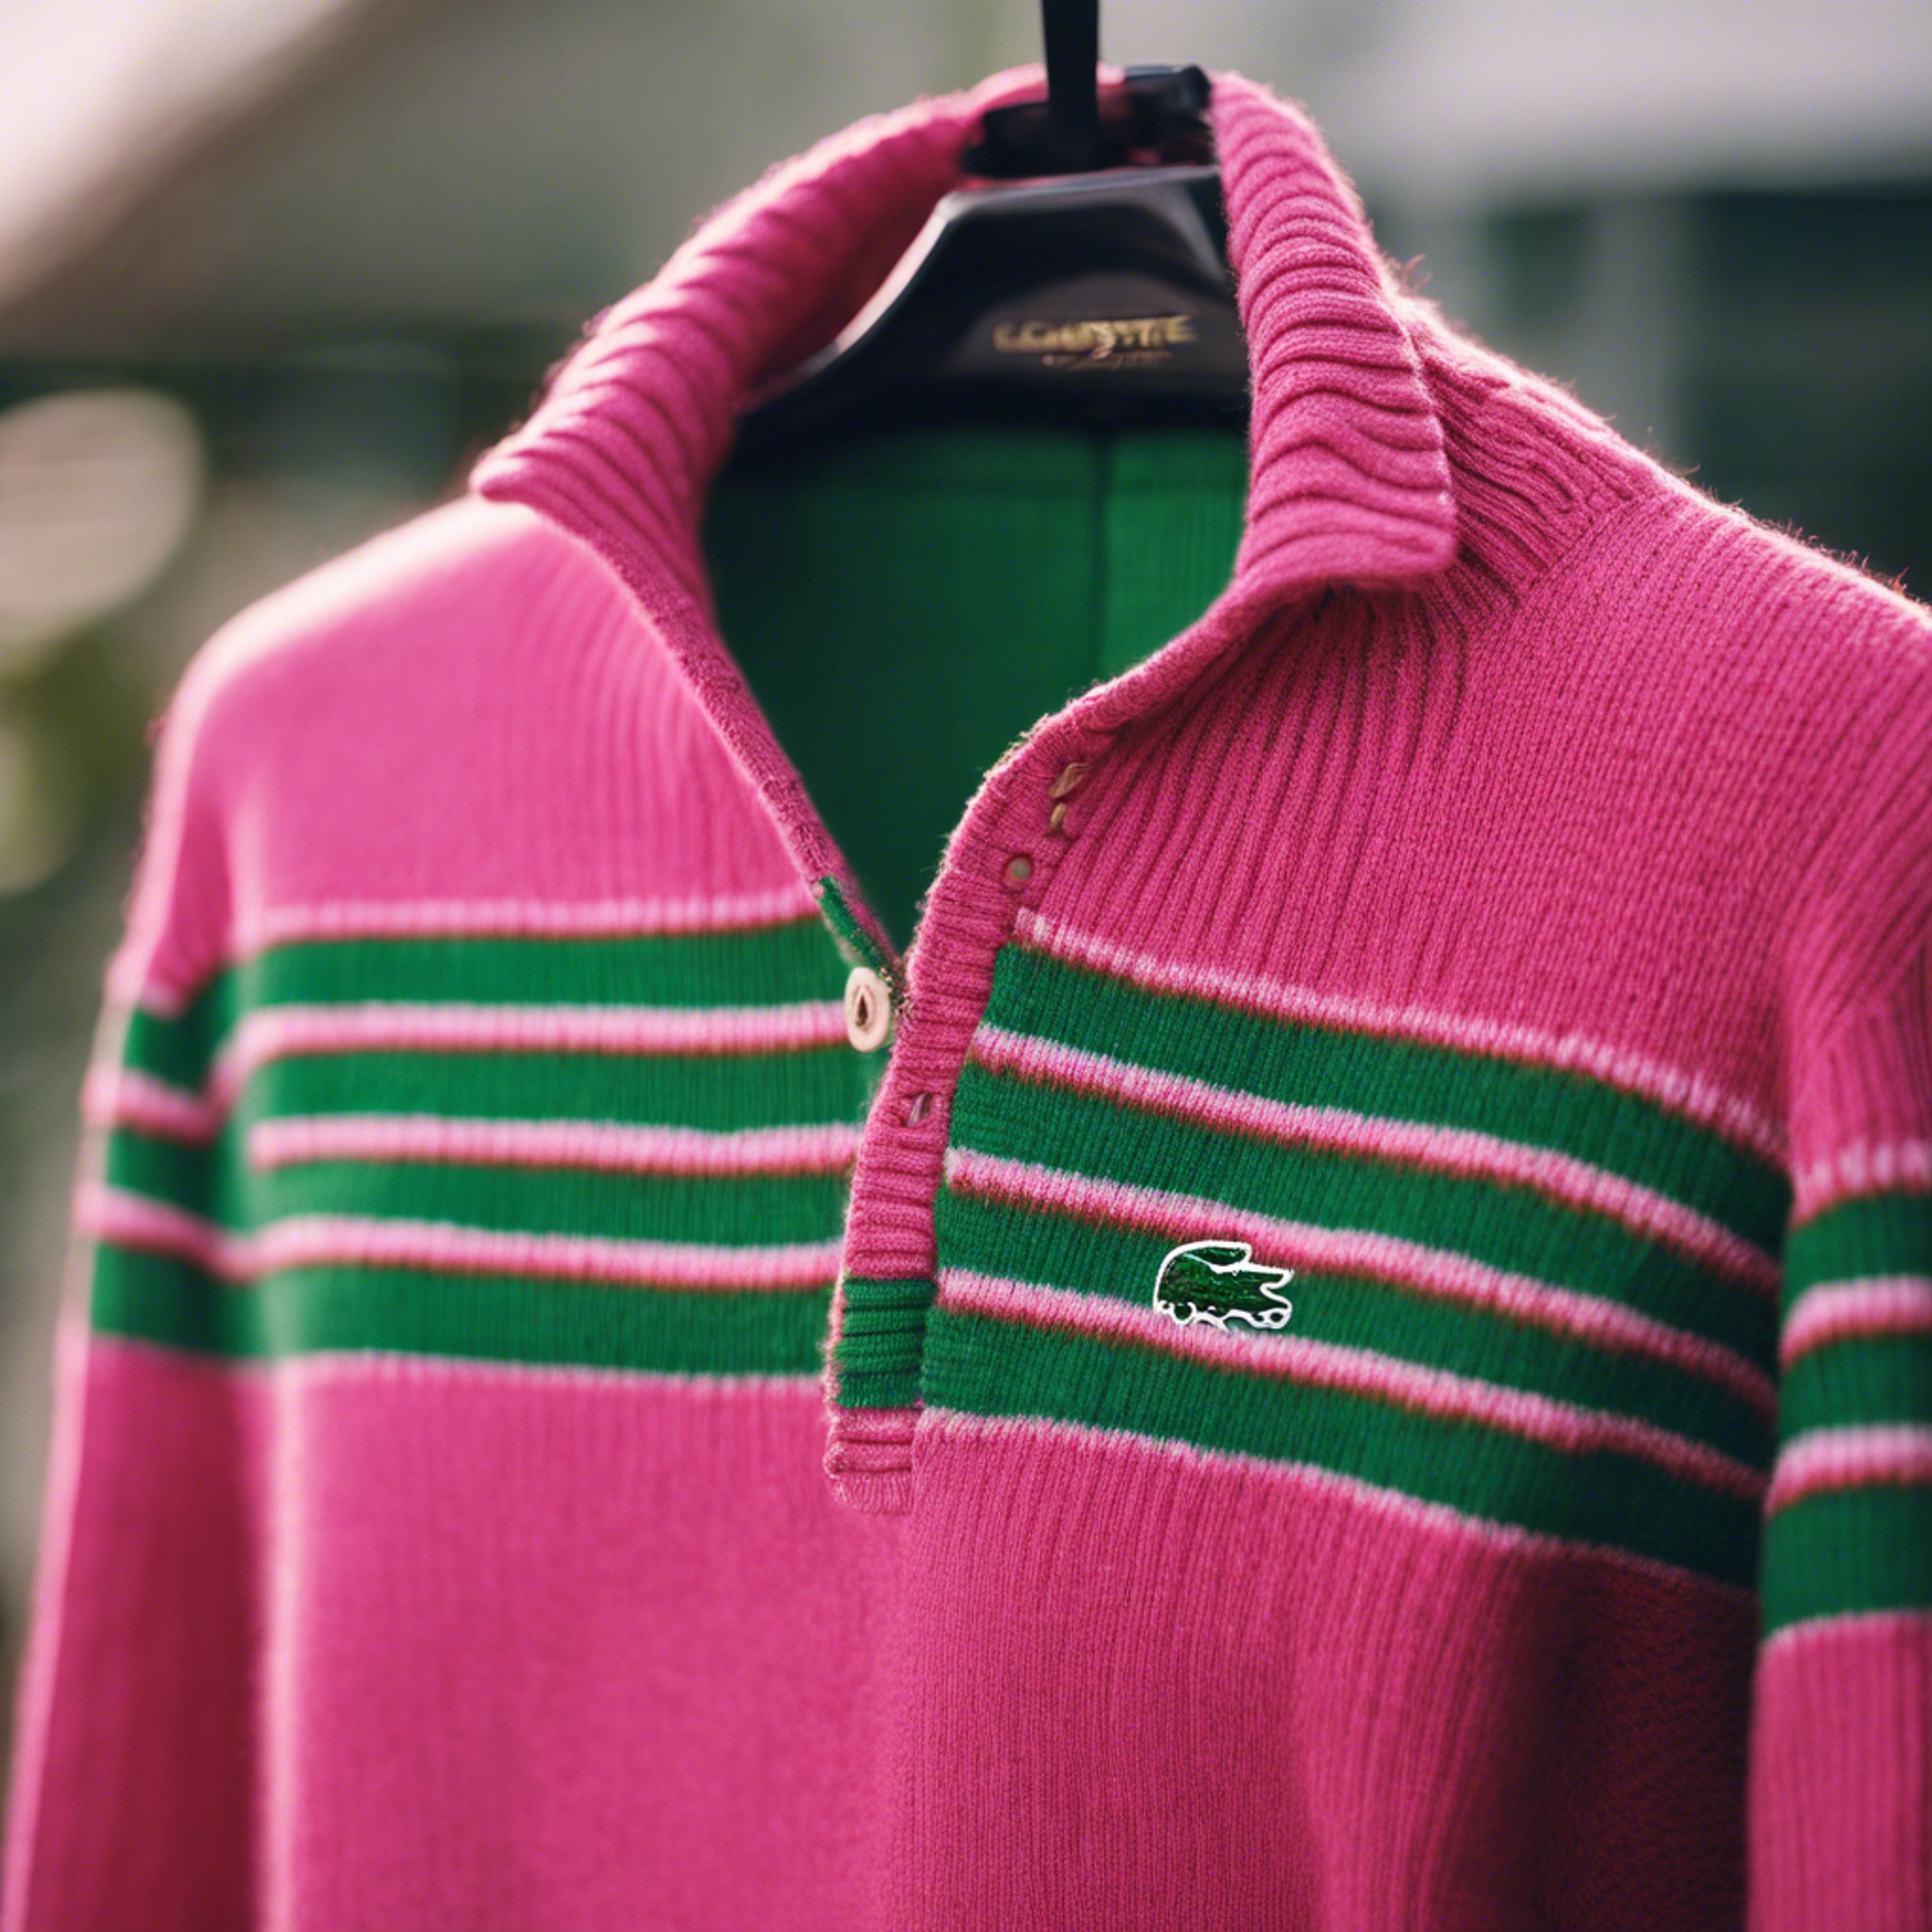 A preppy Lacoste sweater in bright pink and green stripes. Тапет[46dc671cf42d4e658ddb]